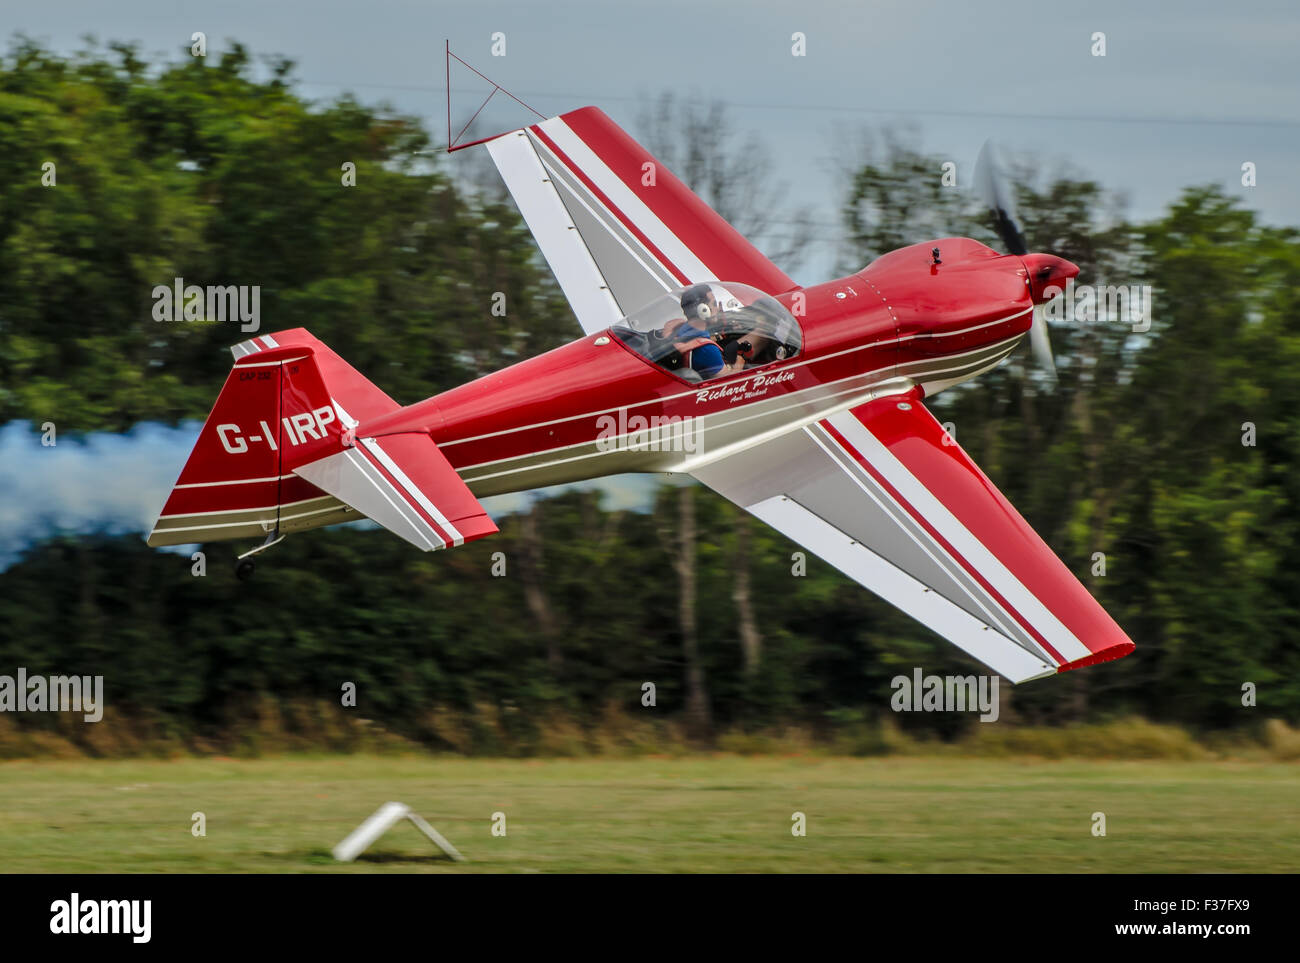 Michael Pickin carrying out a display take off prior to an aerobatic display in his CAP 232 G-IIRP at Damyns Hall, Essex, UK Stock Photo